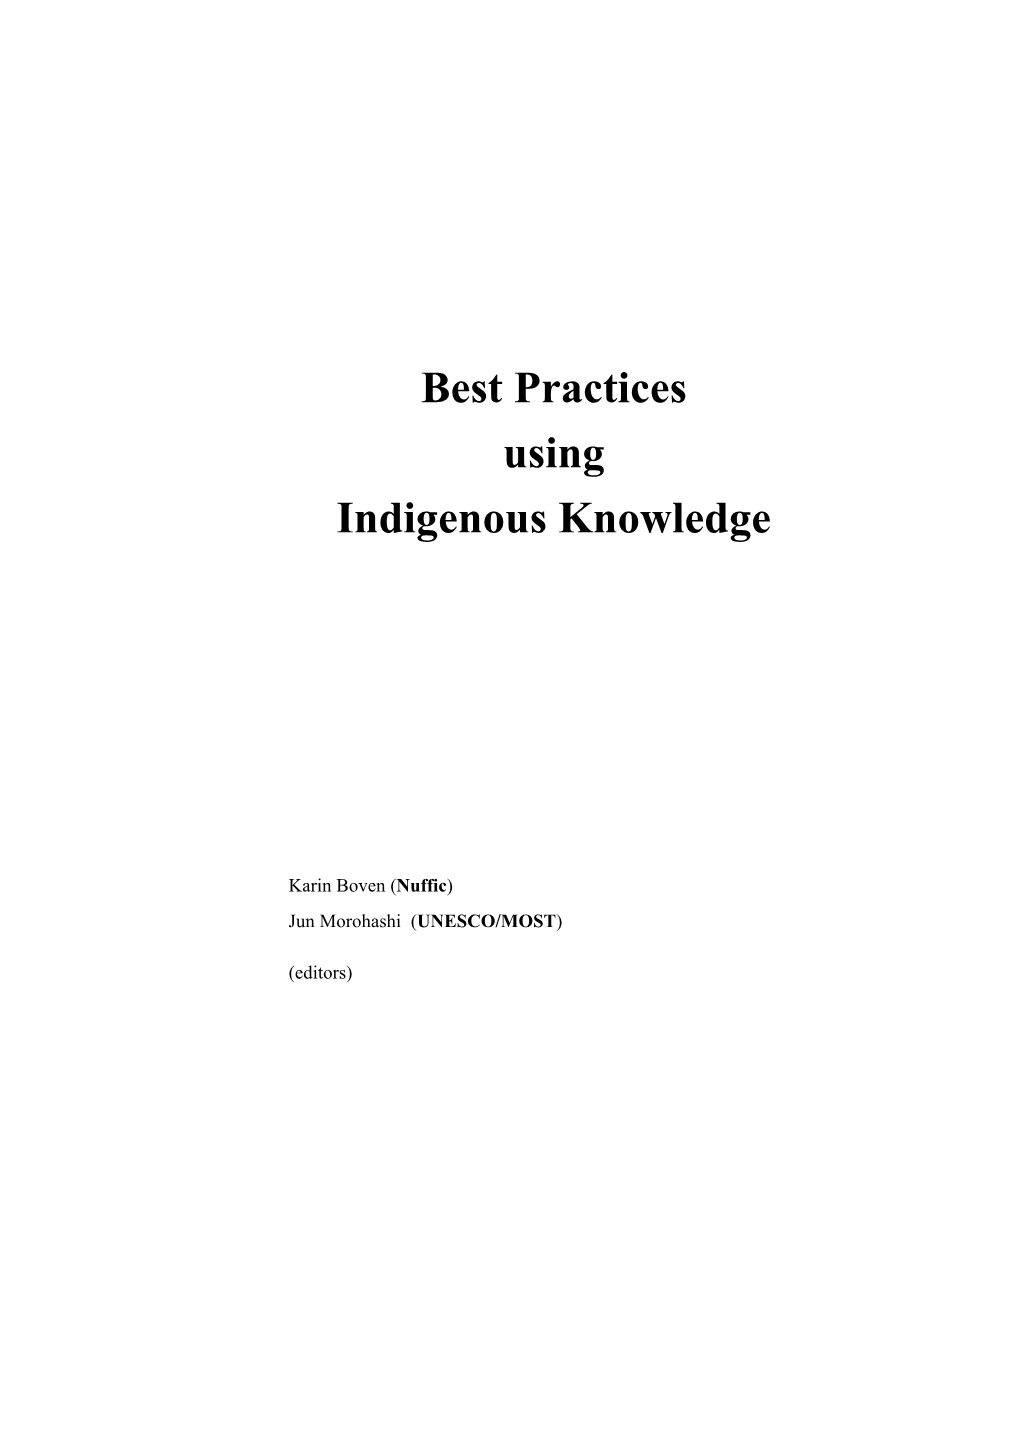 Best Practices Using Indigenous Knowledge